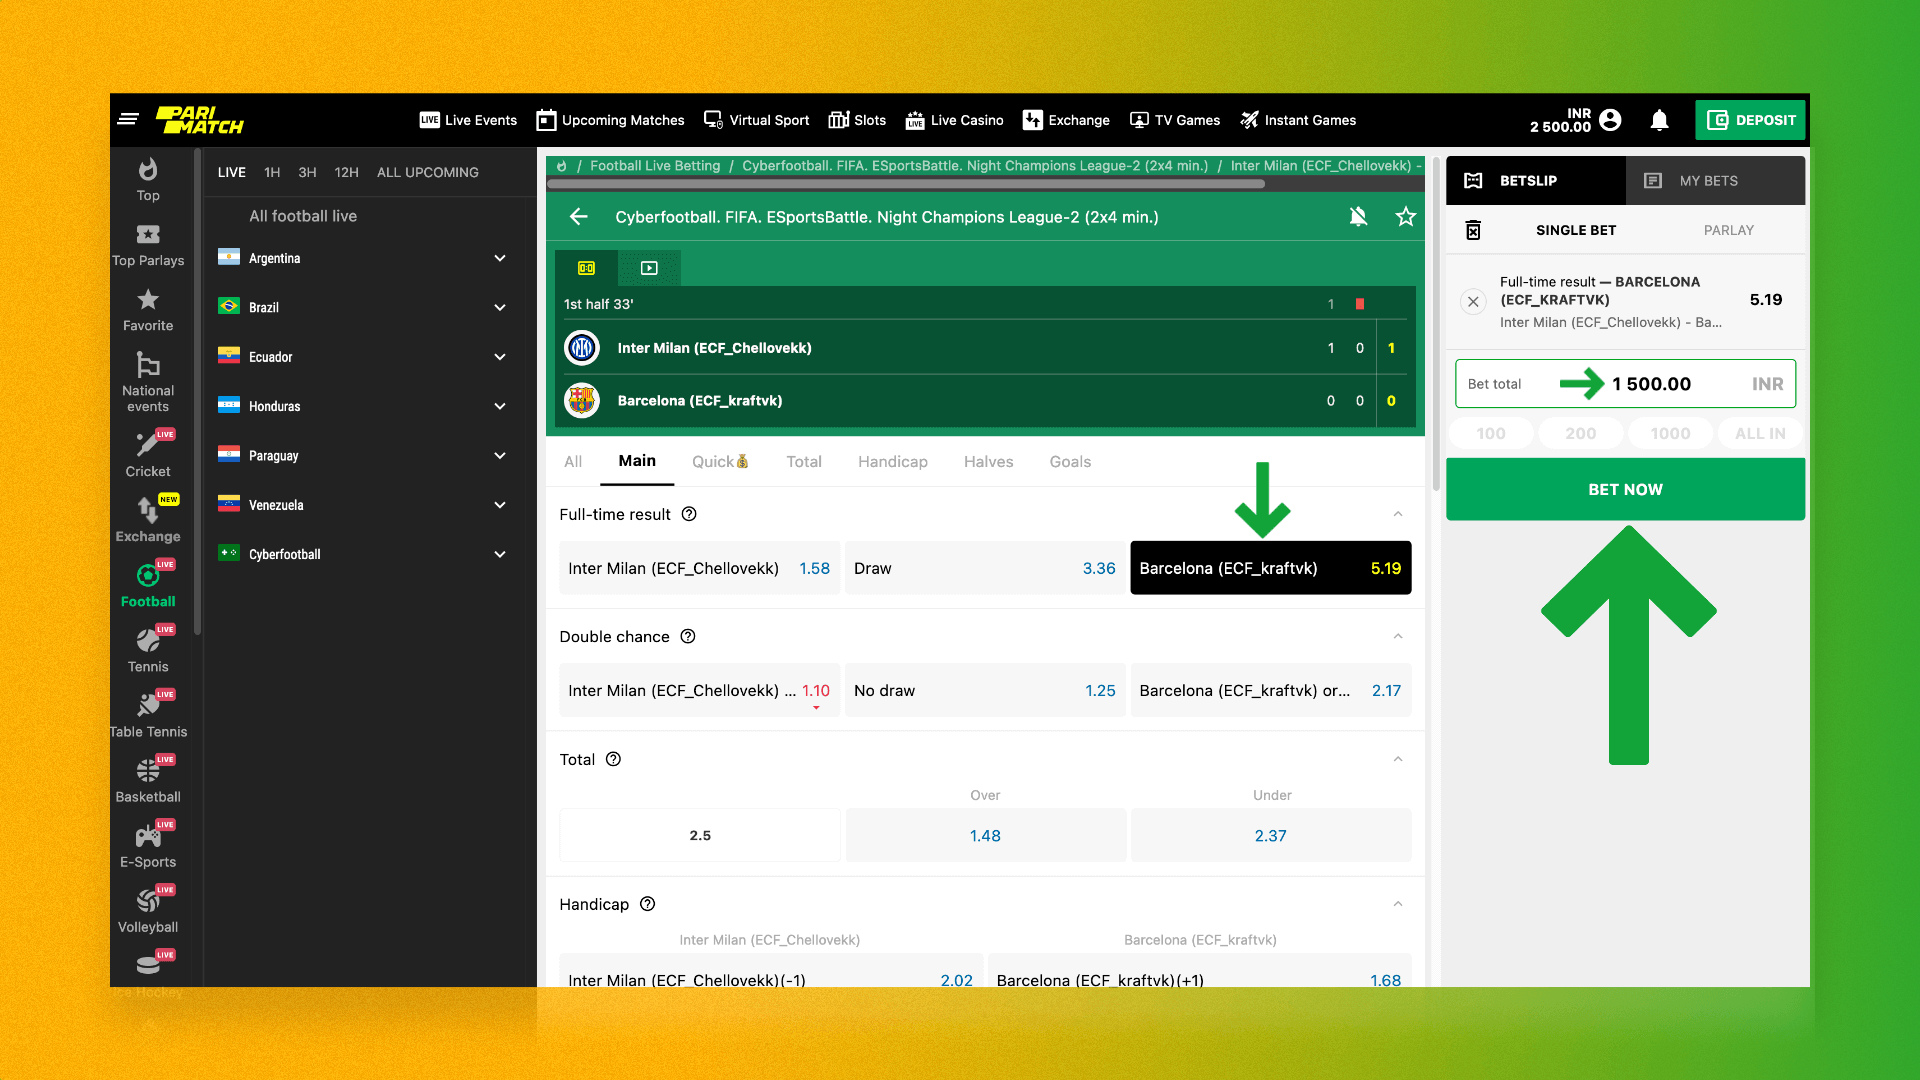 Example of a bet on Parimatch